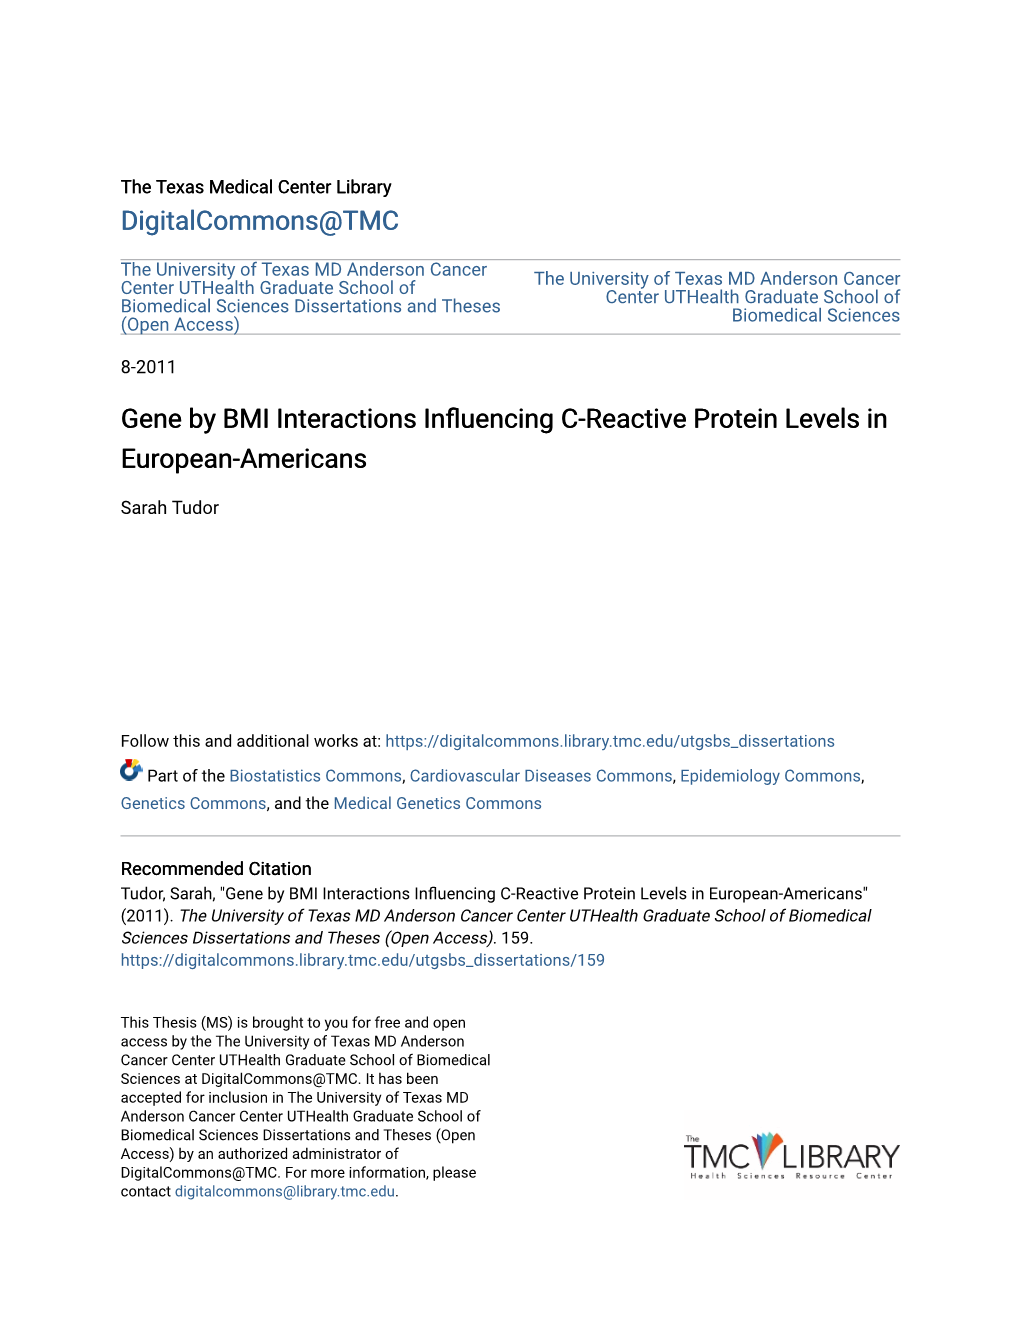 Gene by BMI Interactions Influencing C-Reactive Protein Levels in European-Americans